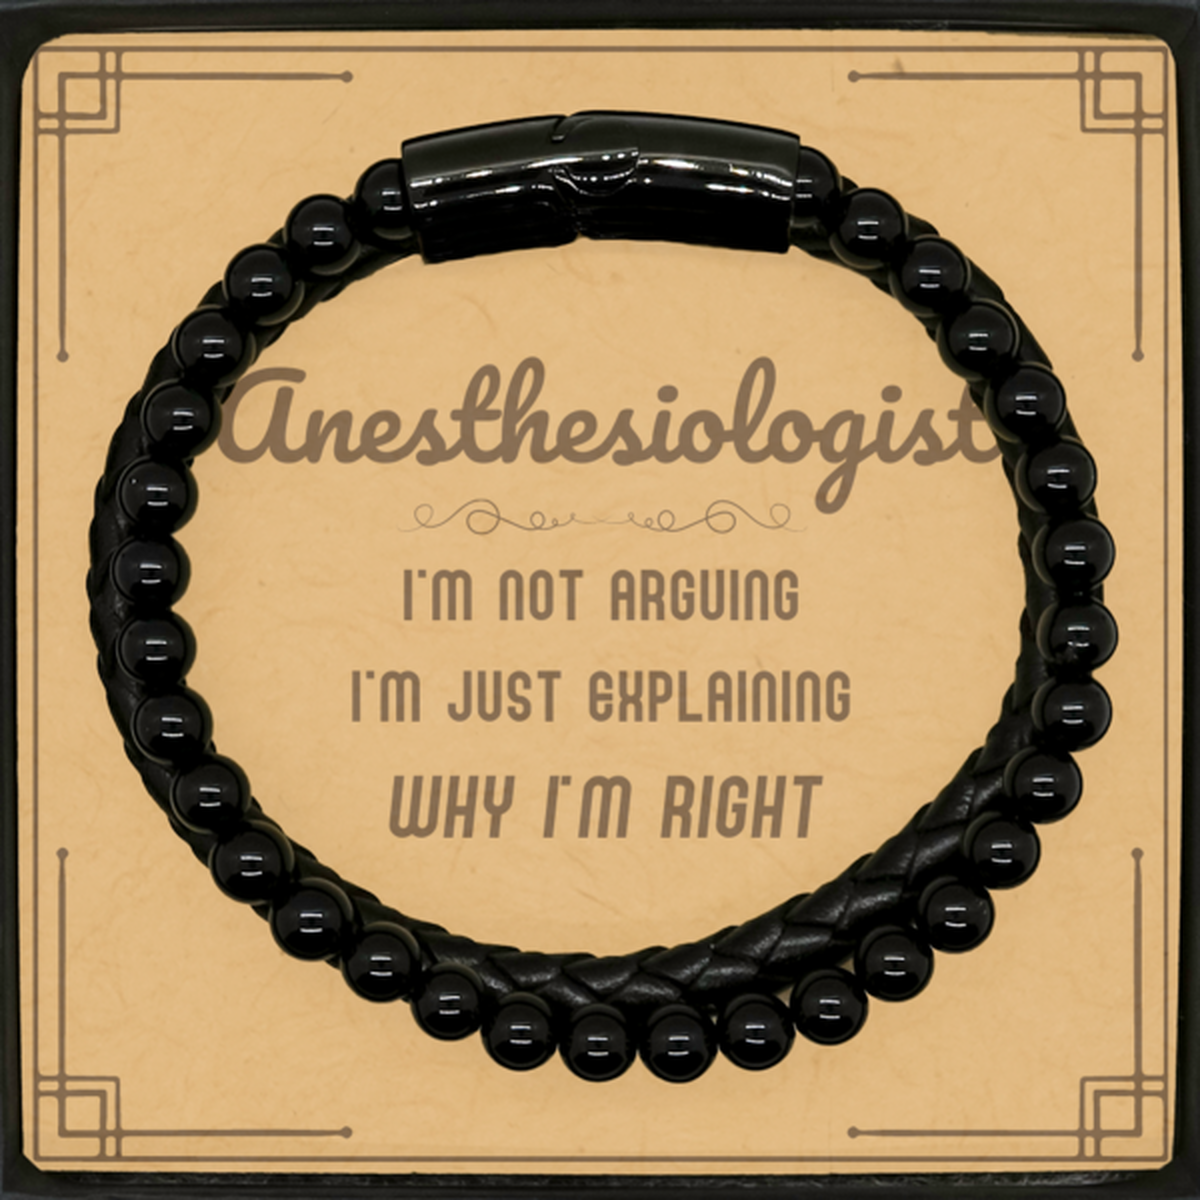 Anesthesiologist I'm not Arguing. I'm Just Explaining Why I'm RIGHT Stone Leather Bracelets, Funny Saying Quote Anesthesiologist Gifts For Anesthesiologist Message Card Graduation Birthday Christmas Gifts for Men Women Coworker